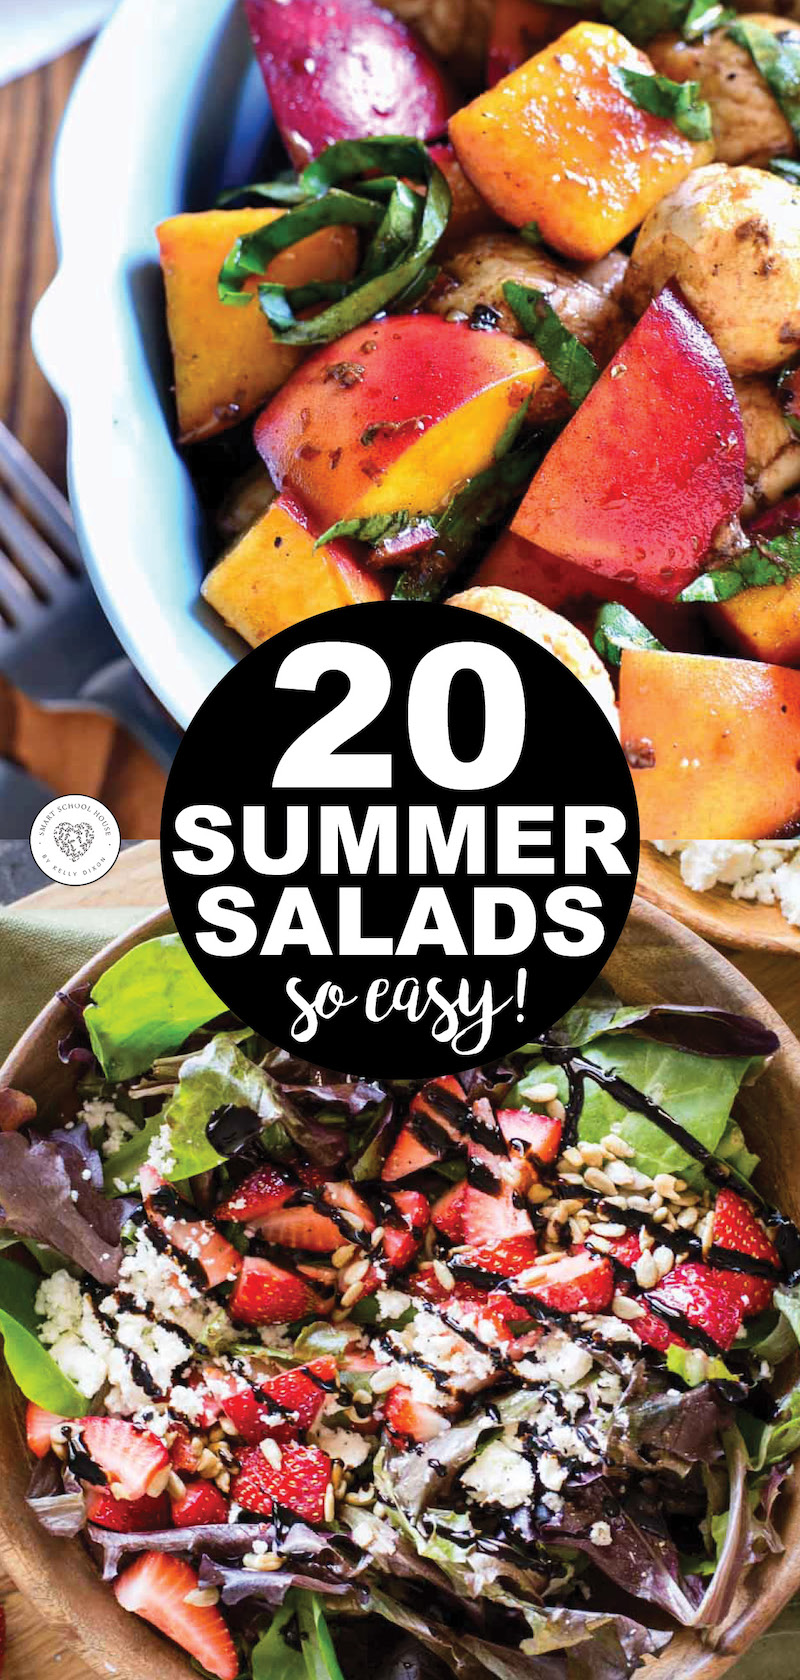 20 easy, beautiful, and tasty summer salad recipes! 